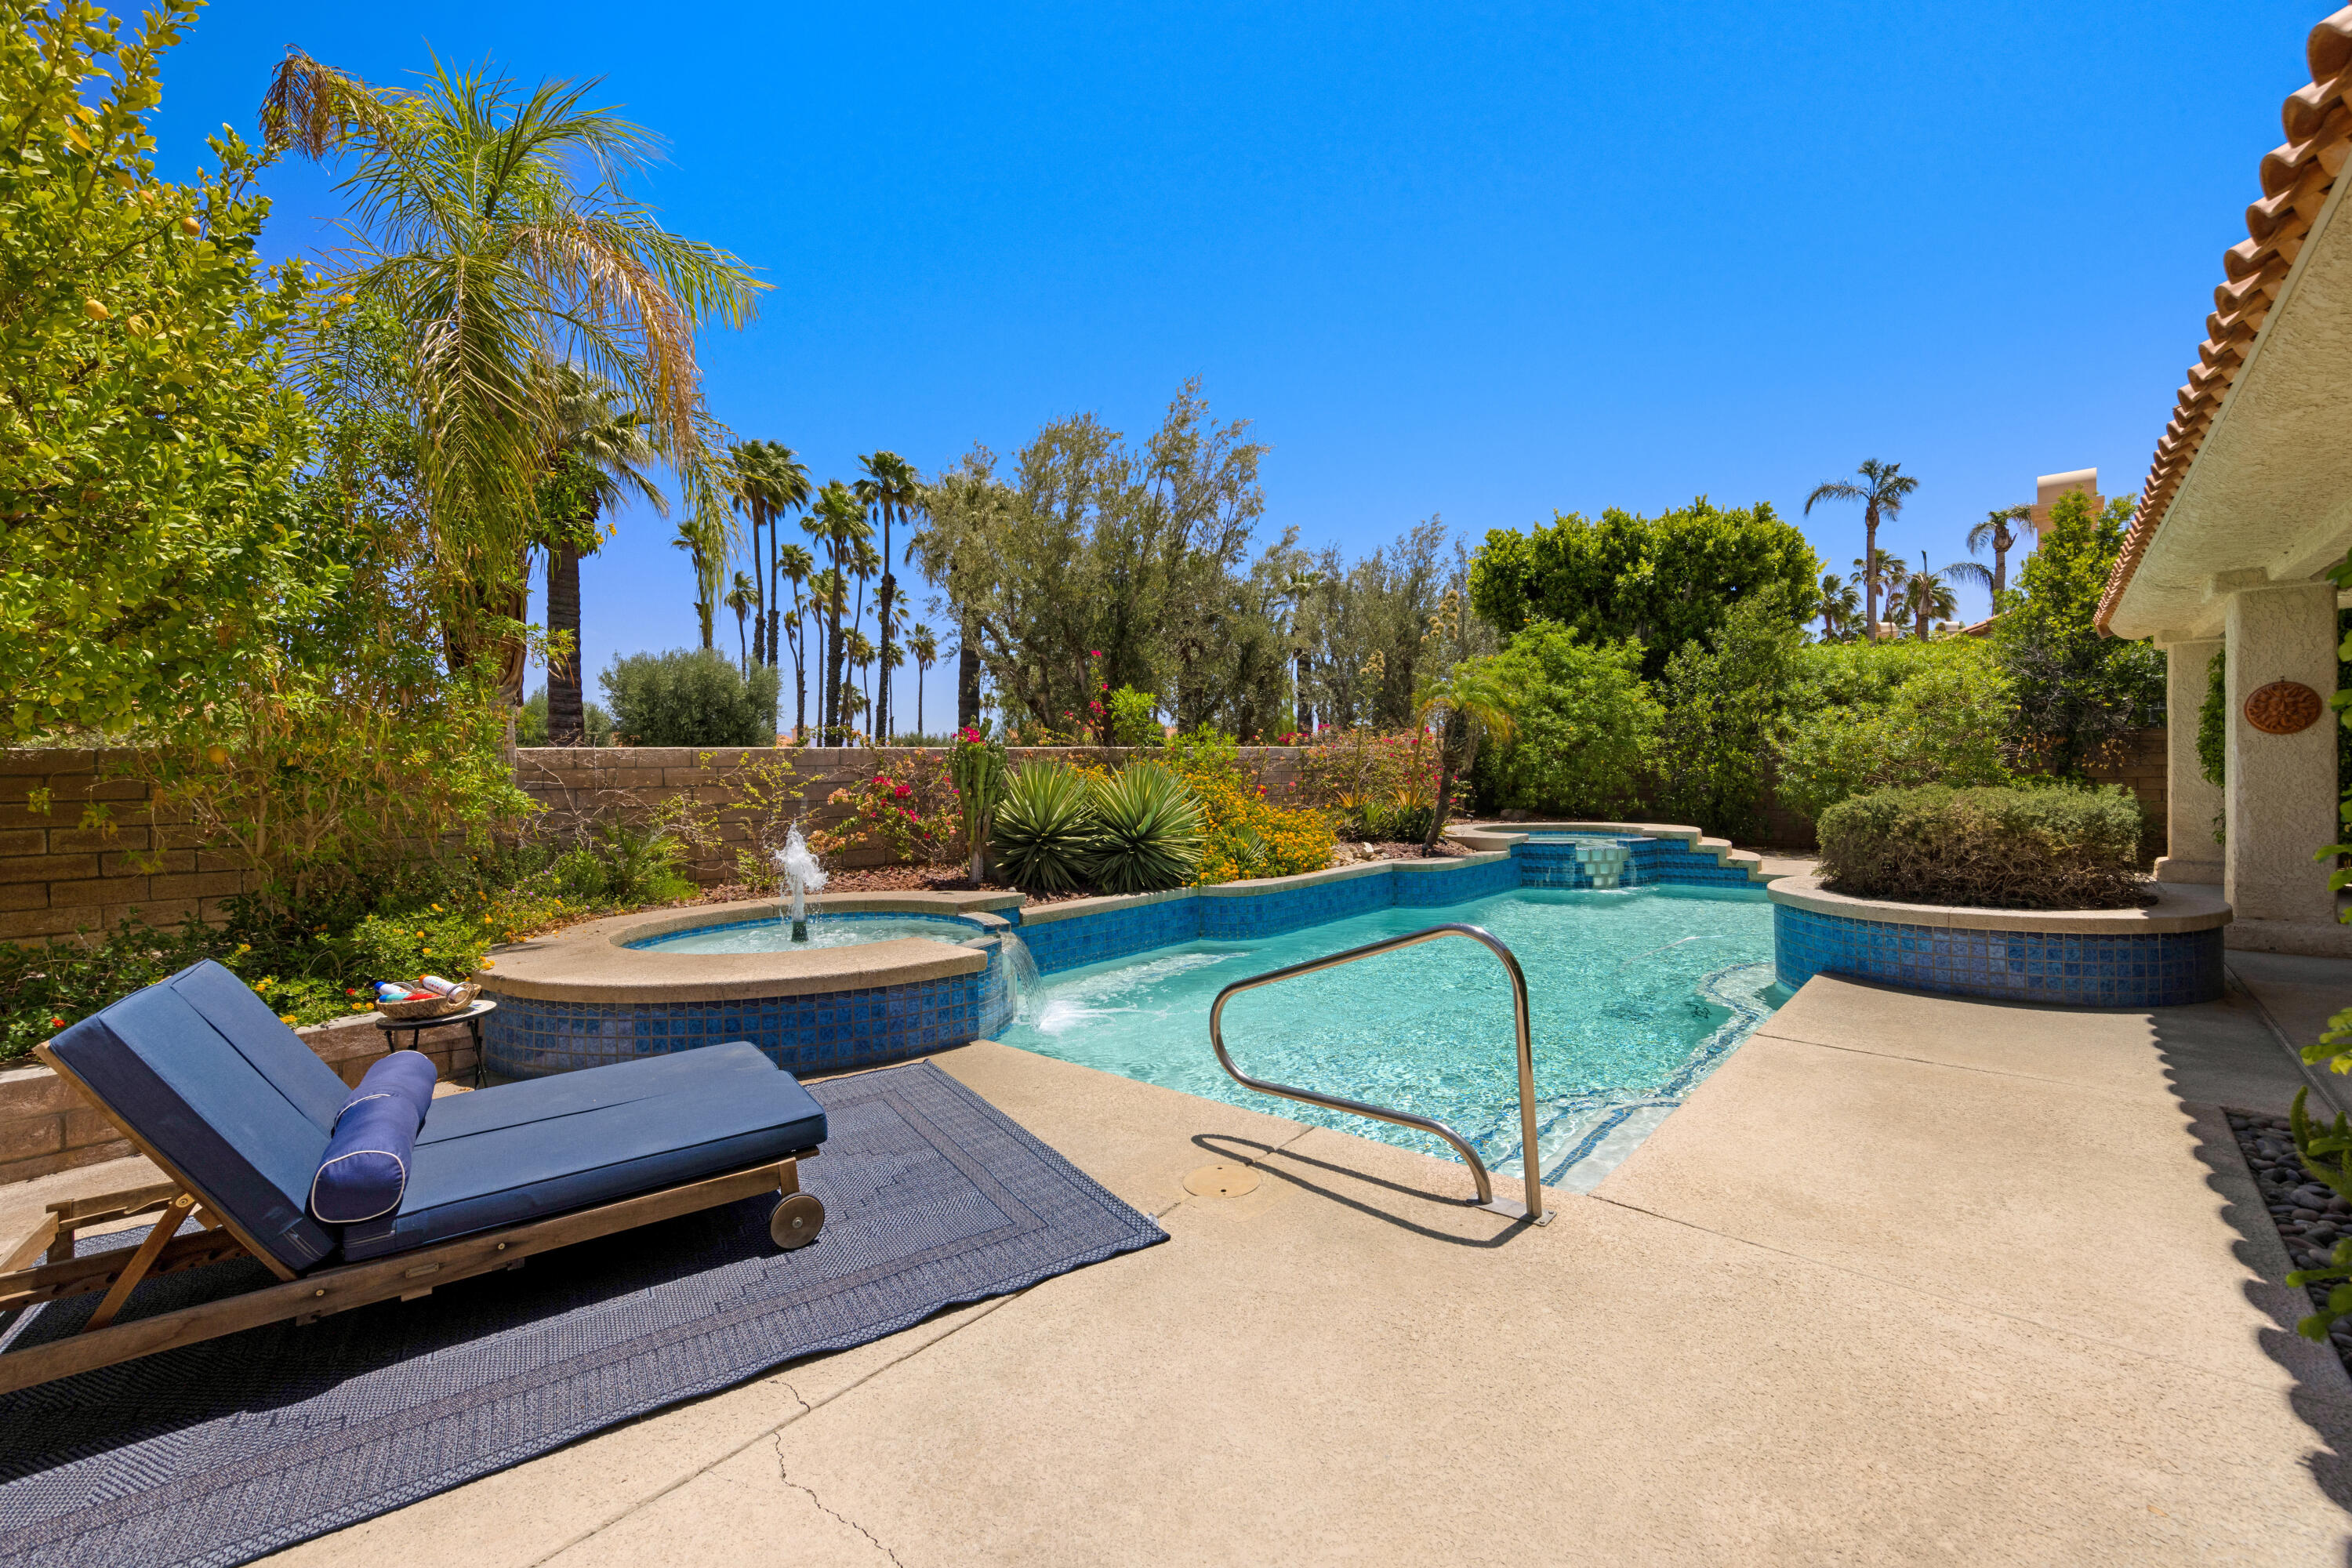 a view of a backyard with couches and swimming pool